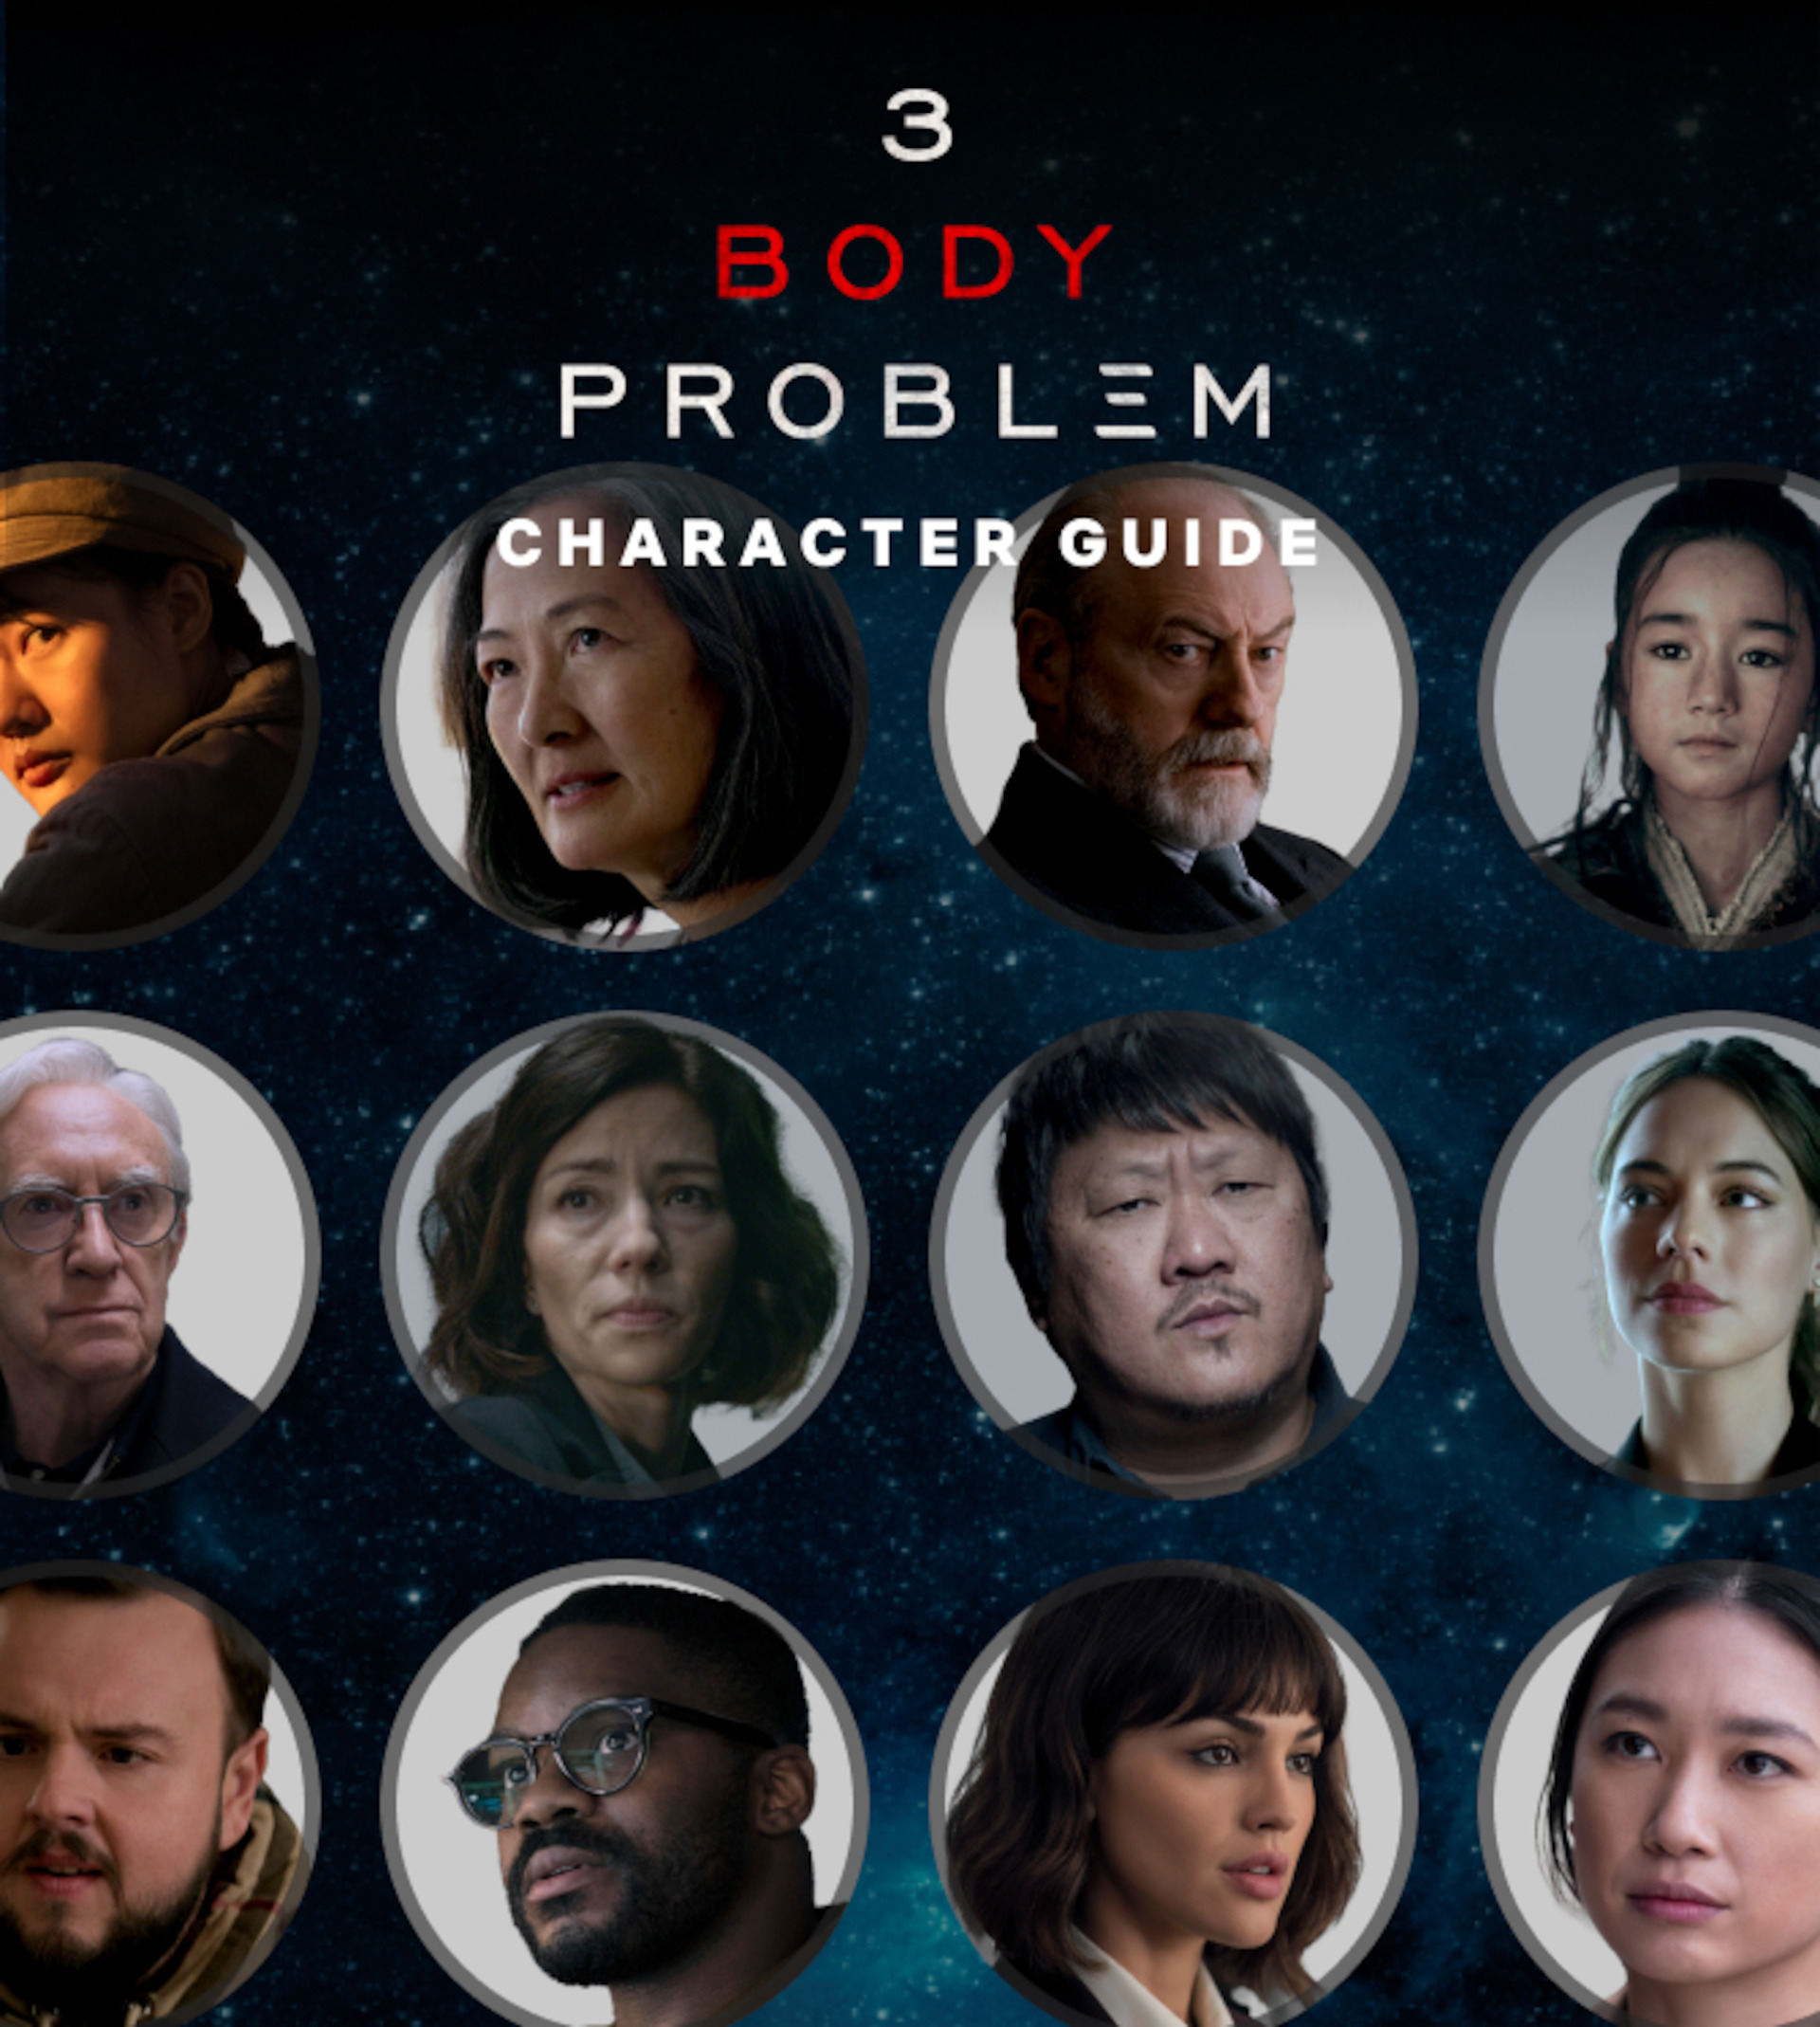 3 Body Problem cast guide - 12 circles with the cast's faces 